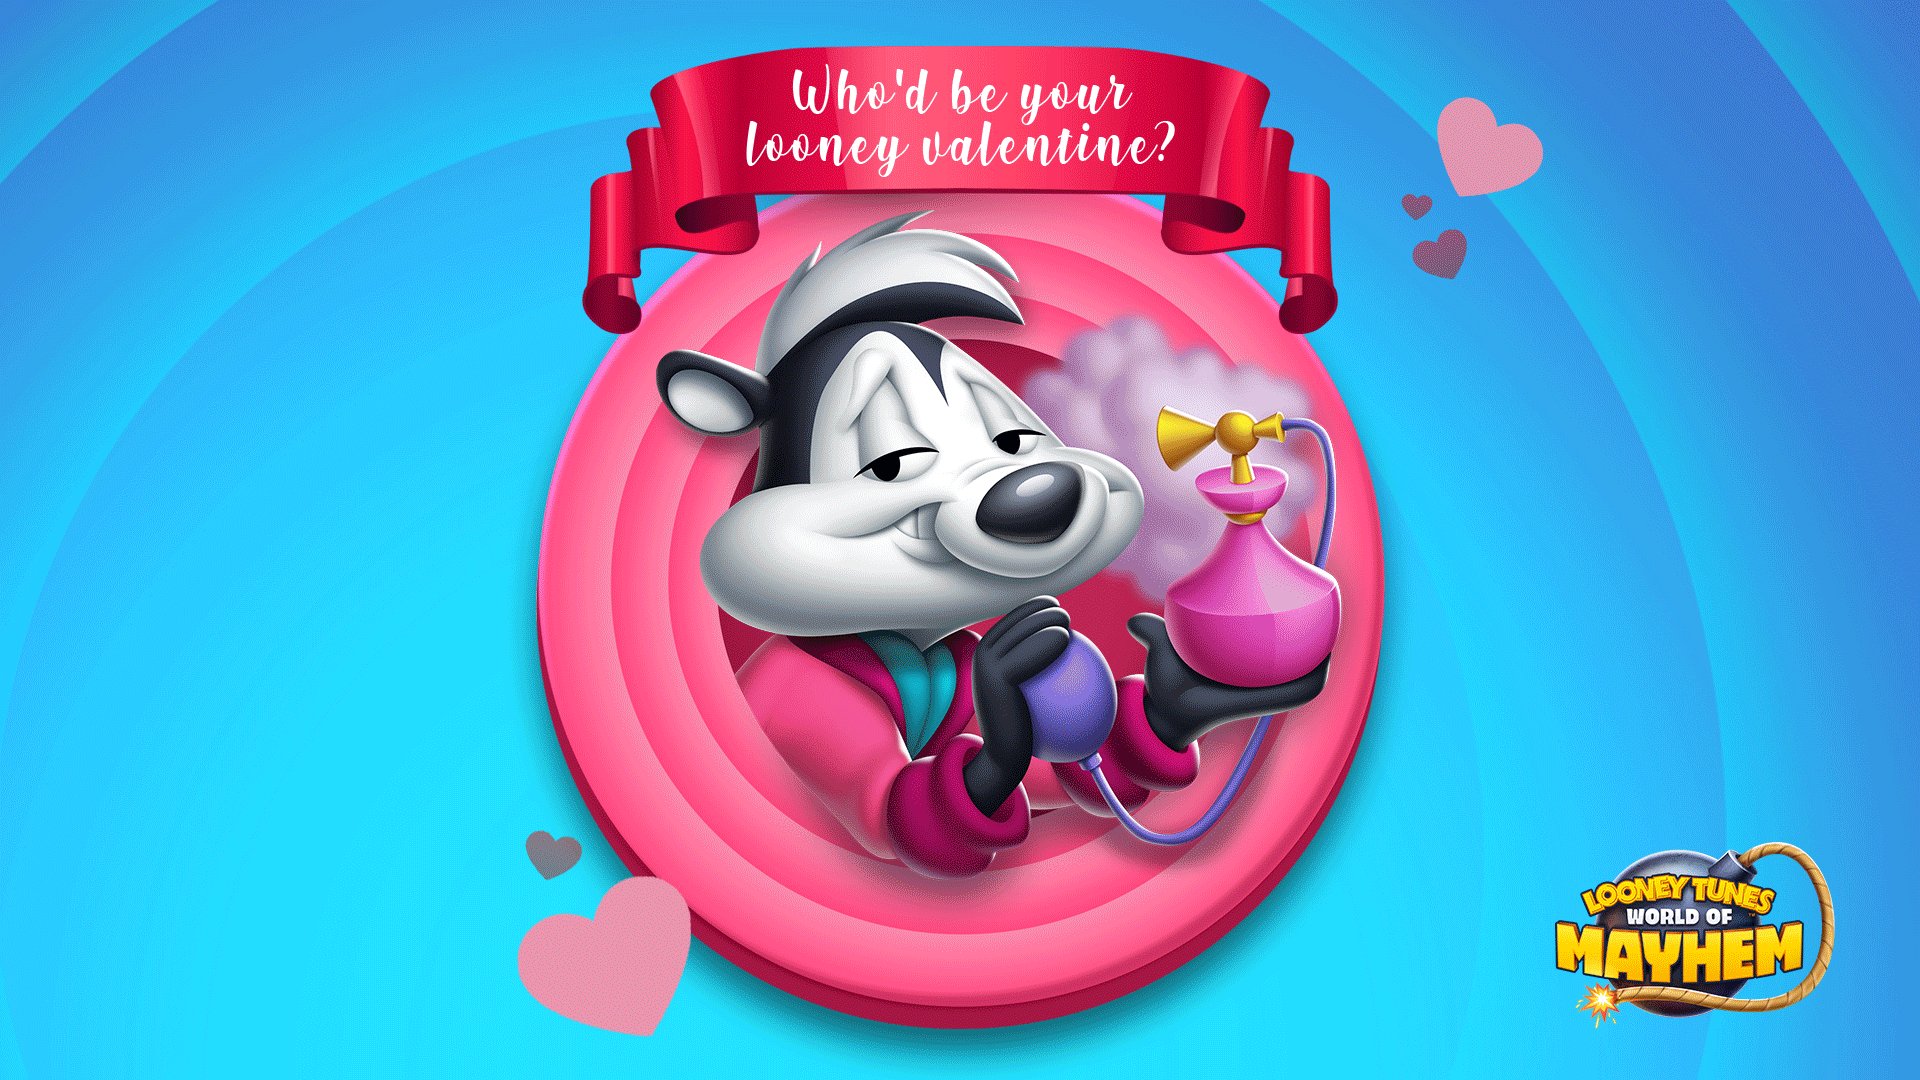 Looney tunes world of mayhem on â whod be your looney valentine â spin the valentines wheel amp share your results below httpstcobciuoadeql